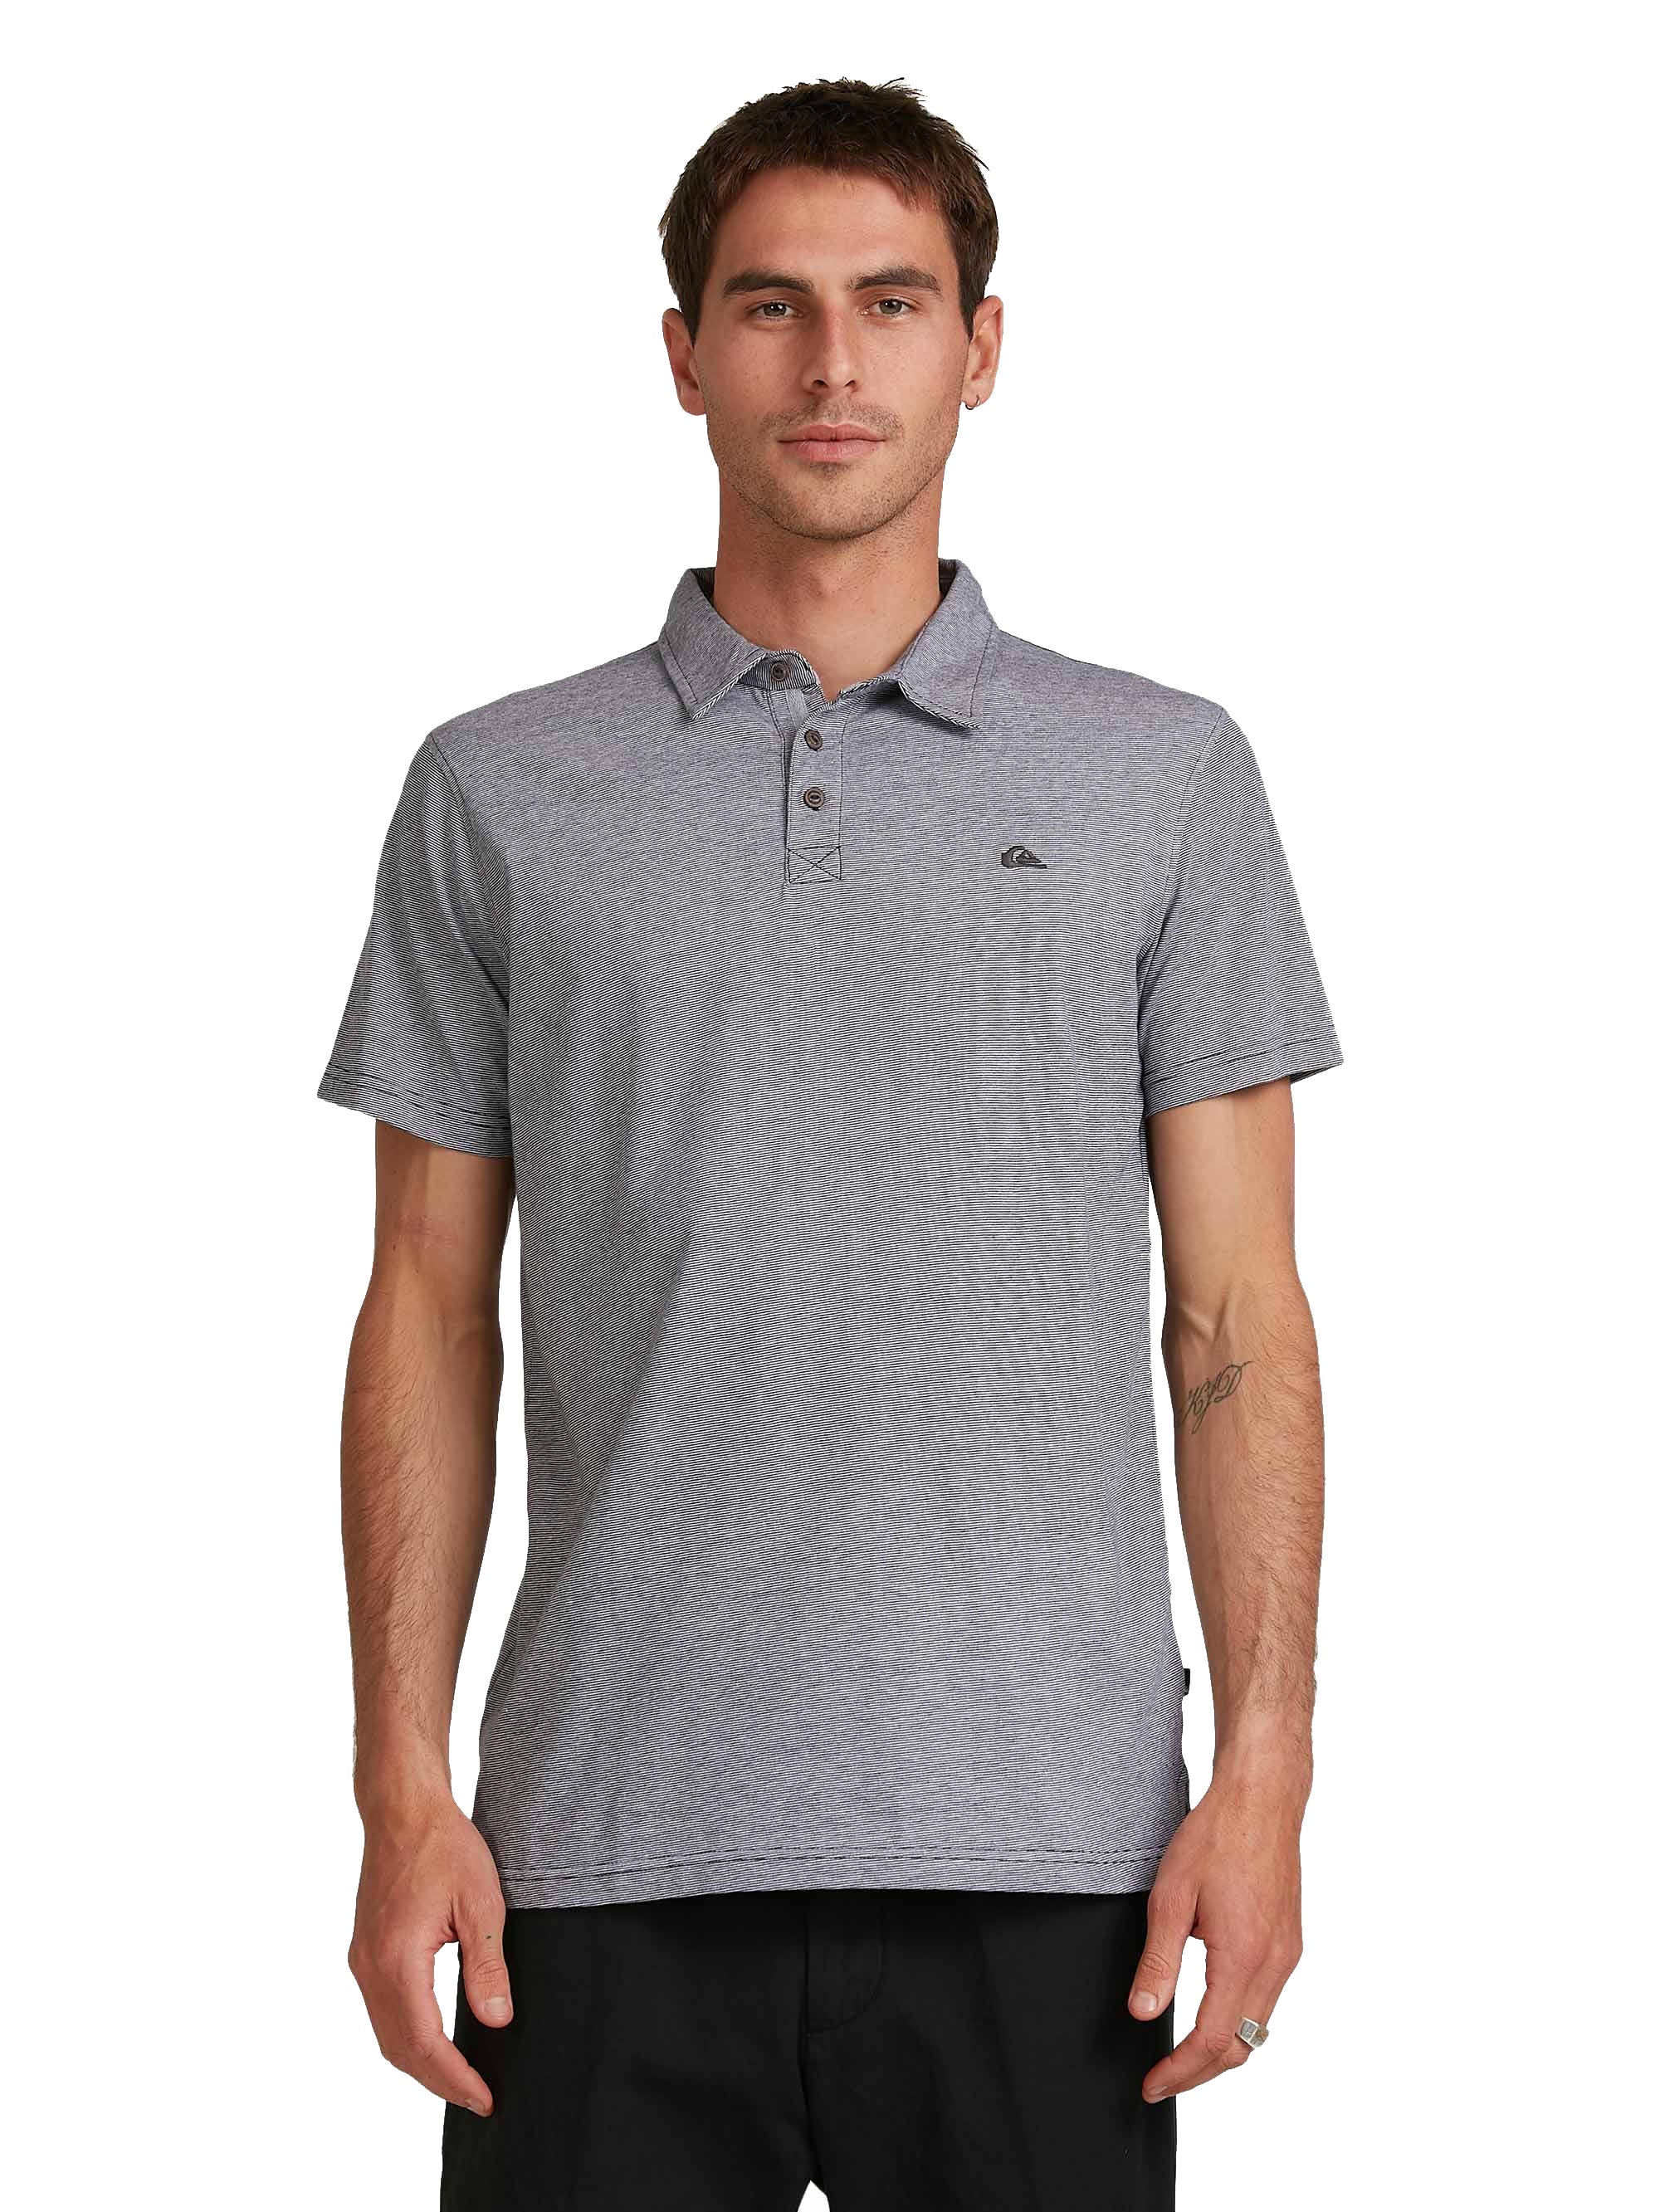 Quiksilver Everyday SunCruise Mens Polo BYP0 L